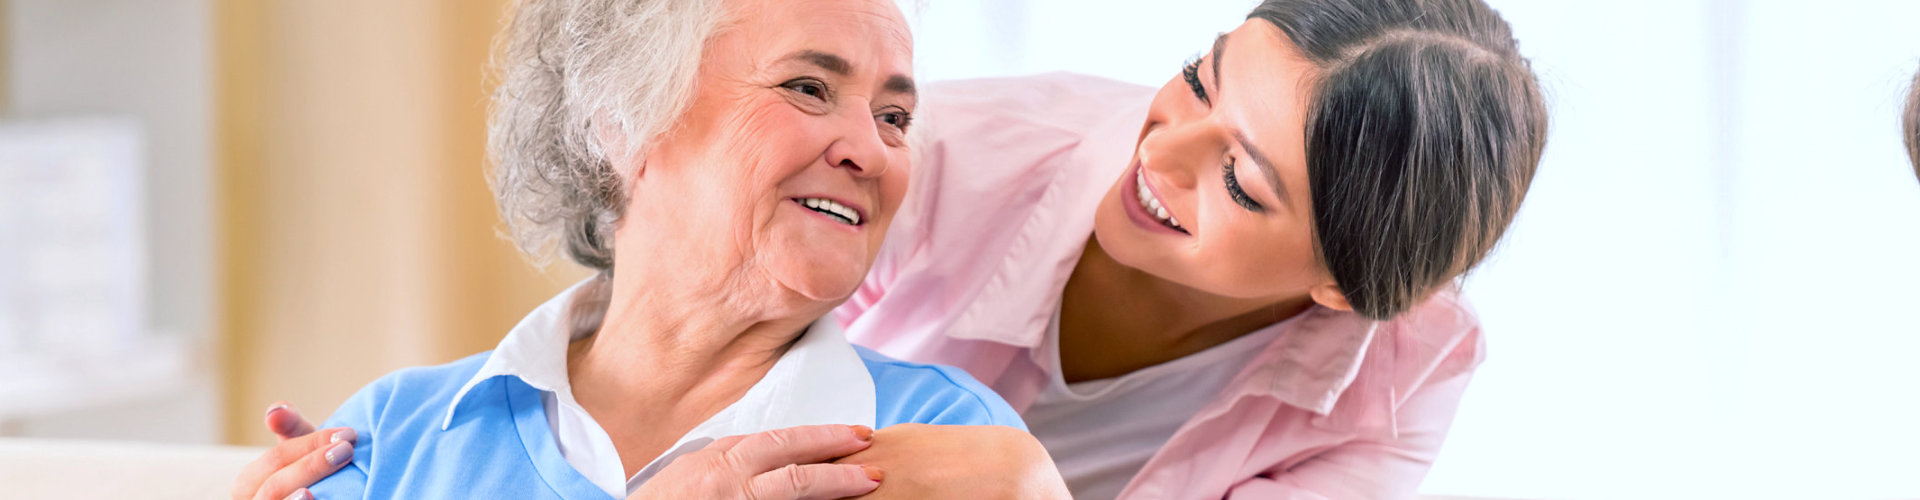 caregiver smiling with her senior patient from behind